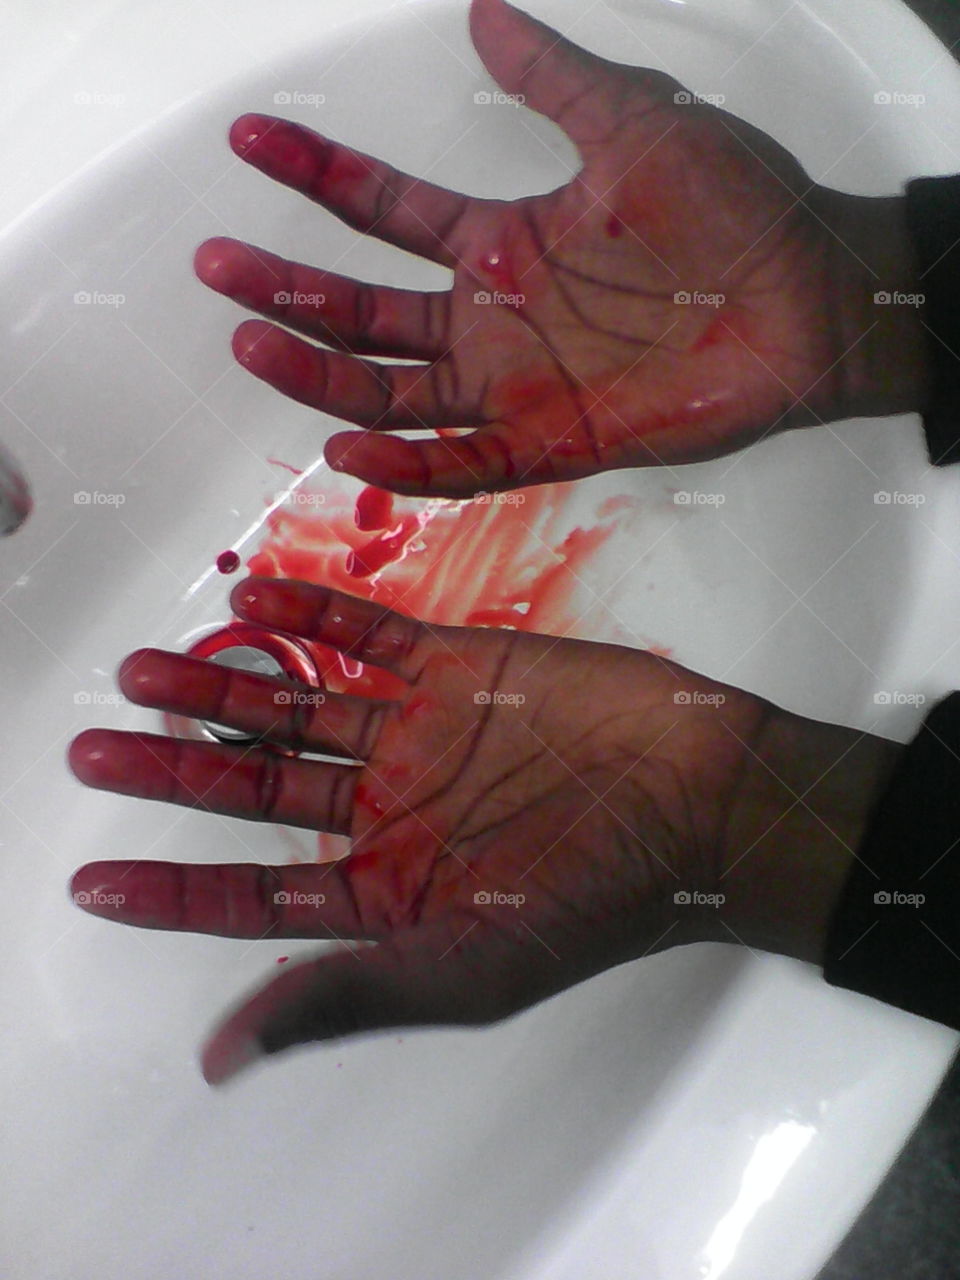 Blood on my hands